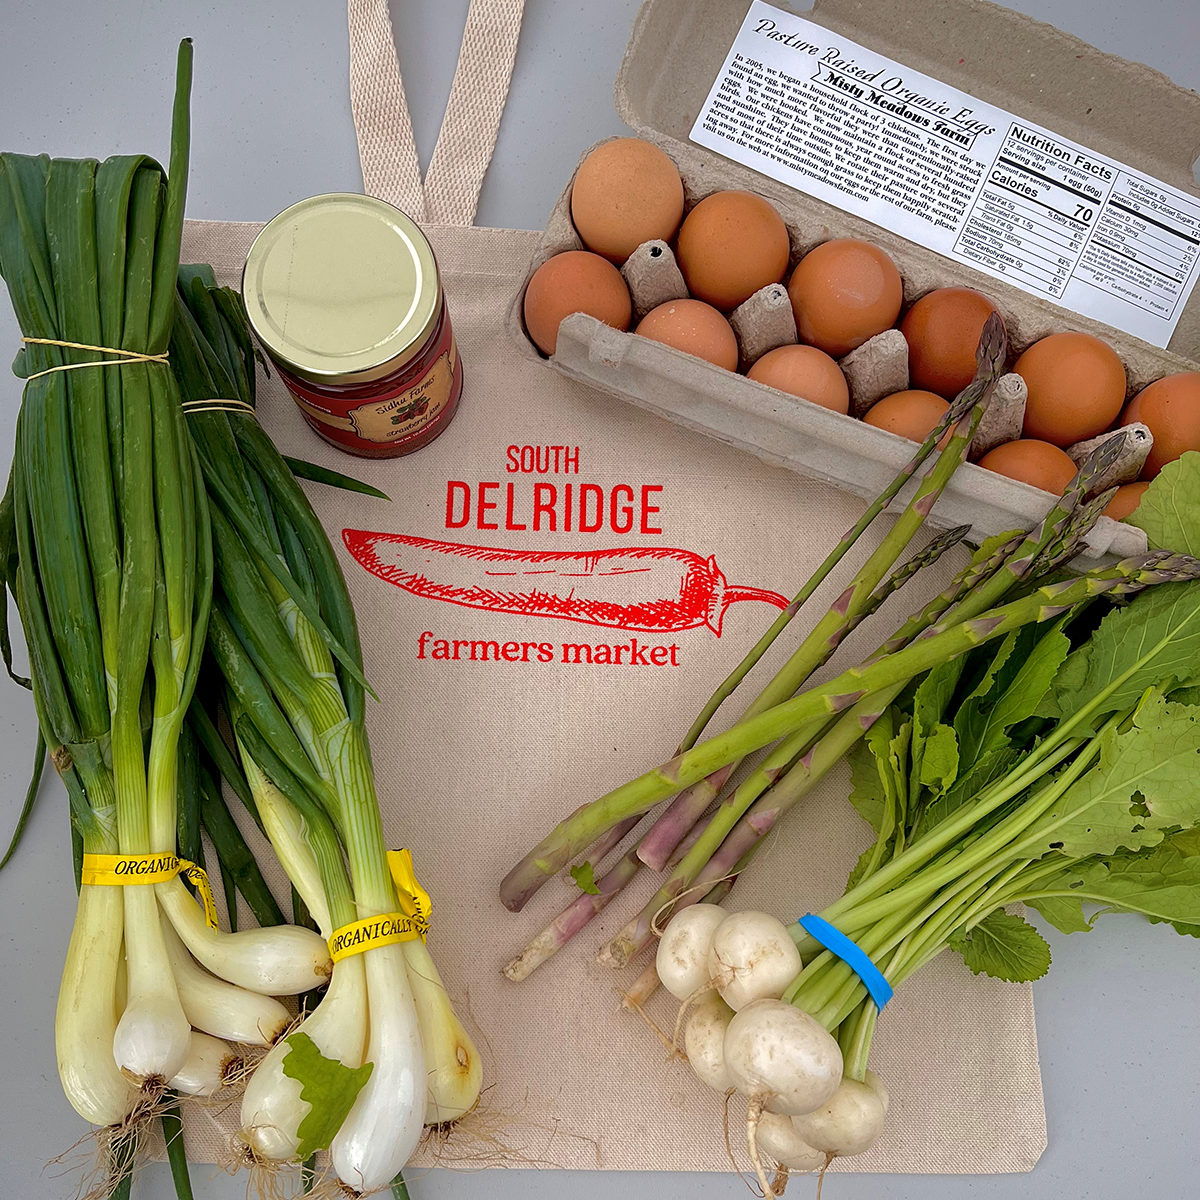 carton of brown eggs, produce, and a jar of jam sitting on top of a cloth bag that reads "South Delridge Farmers Market"